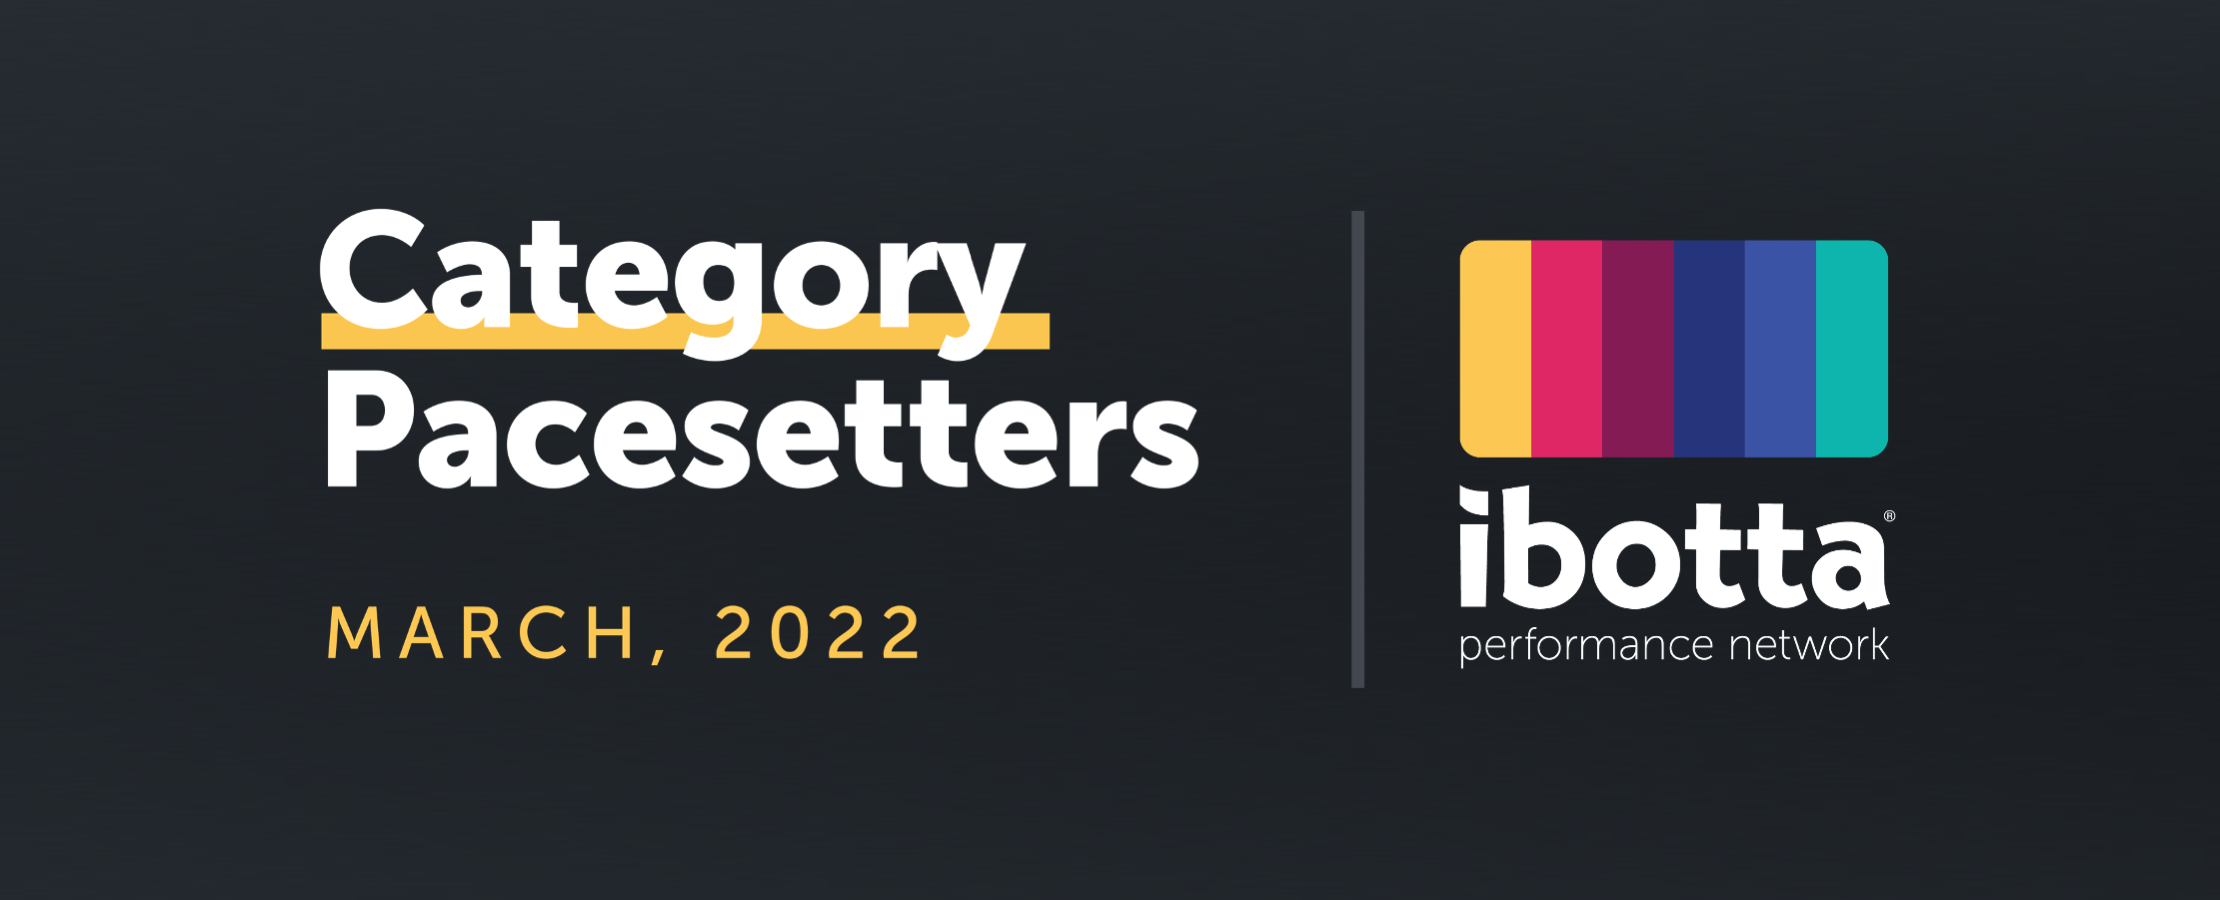 Category Pacesetters: March 2022